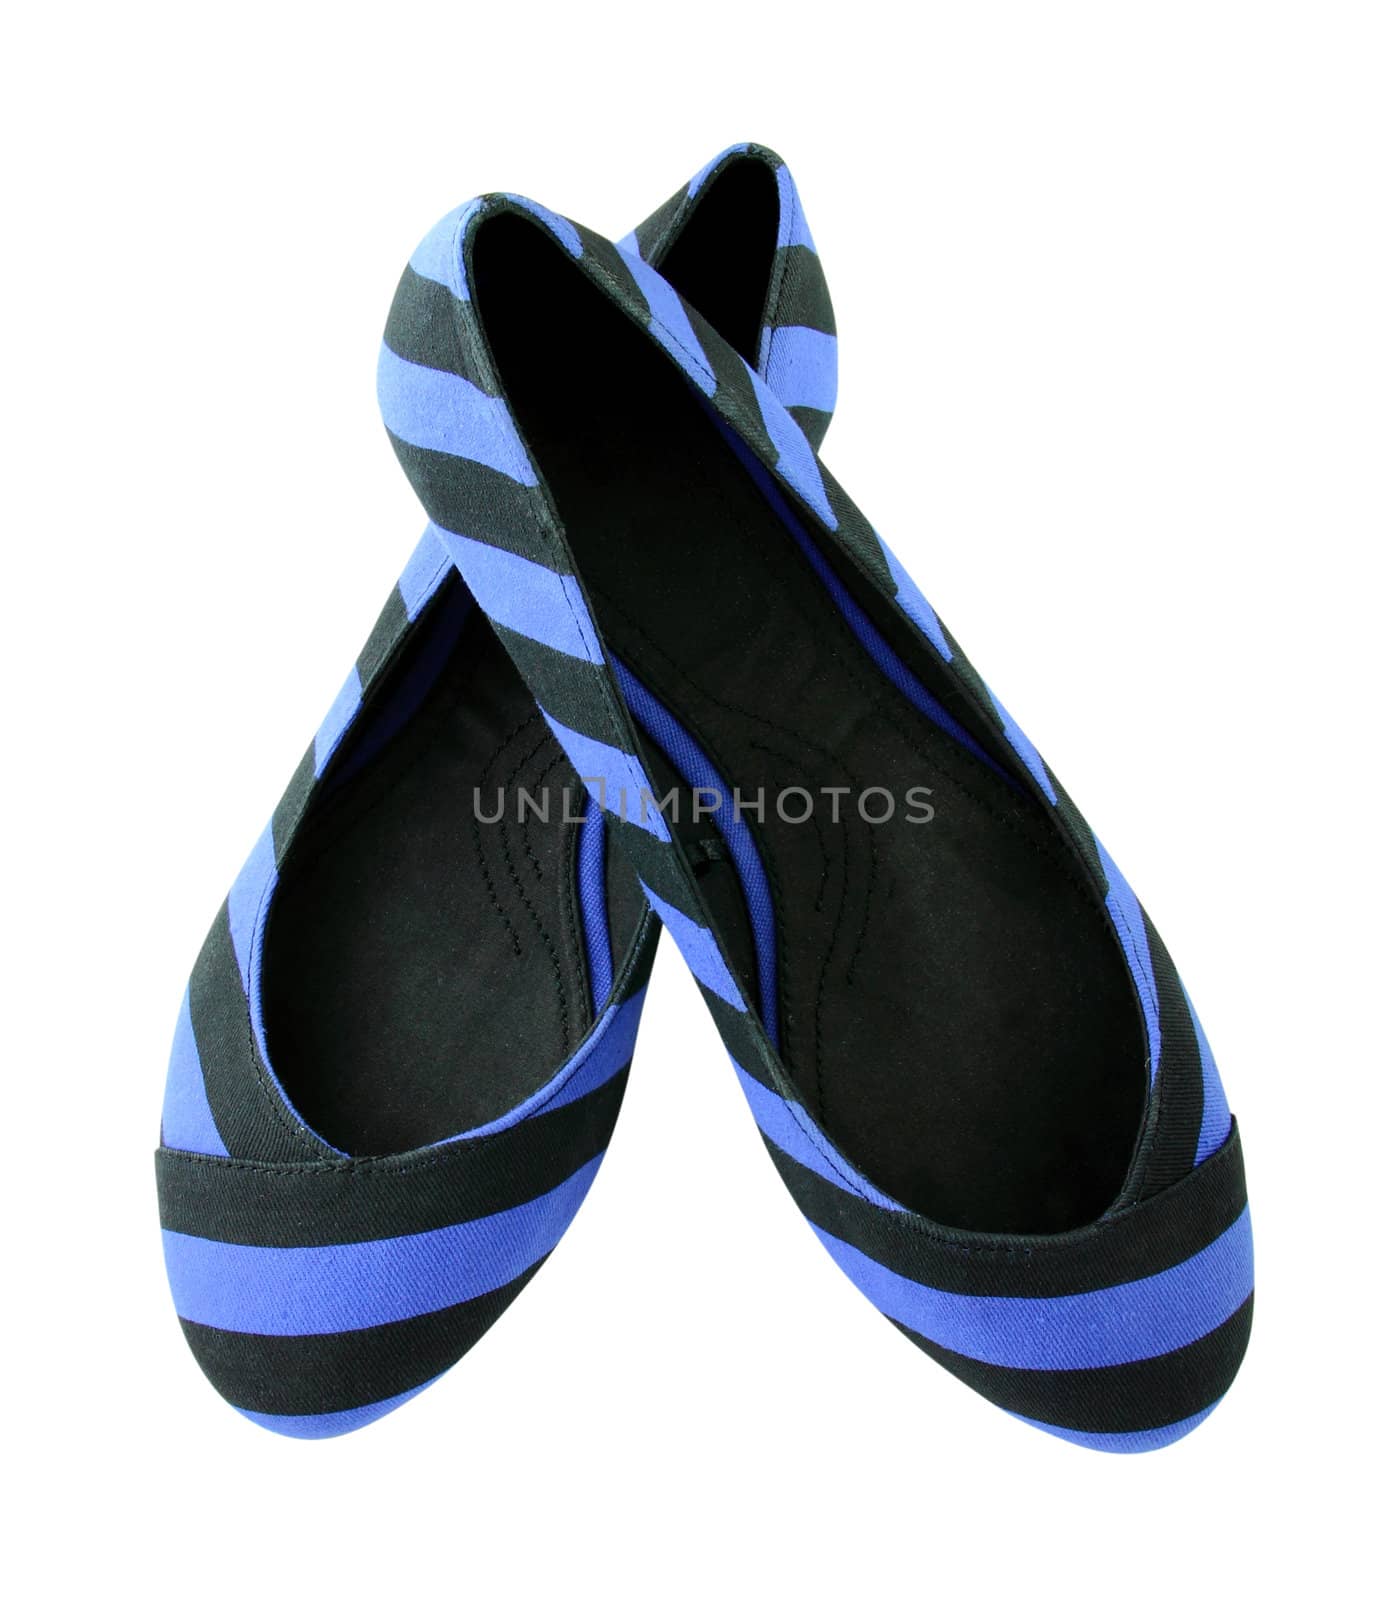 Blue striped shoes for woman isolated on white background 